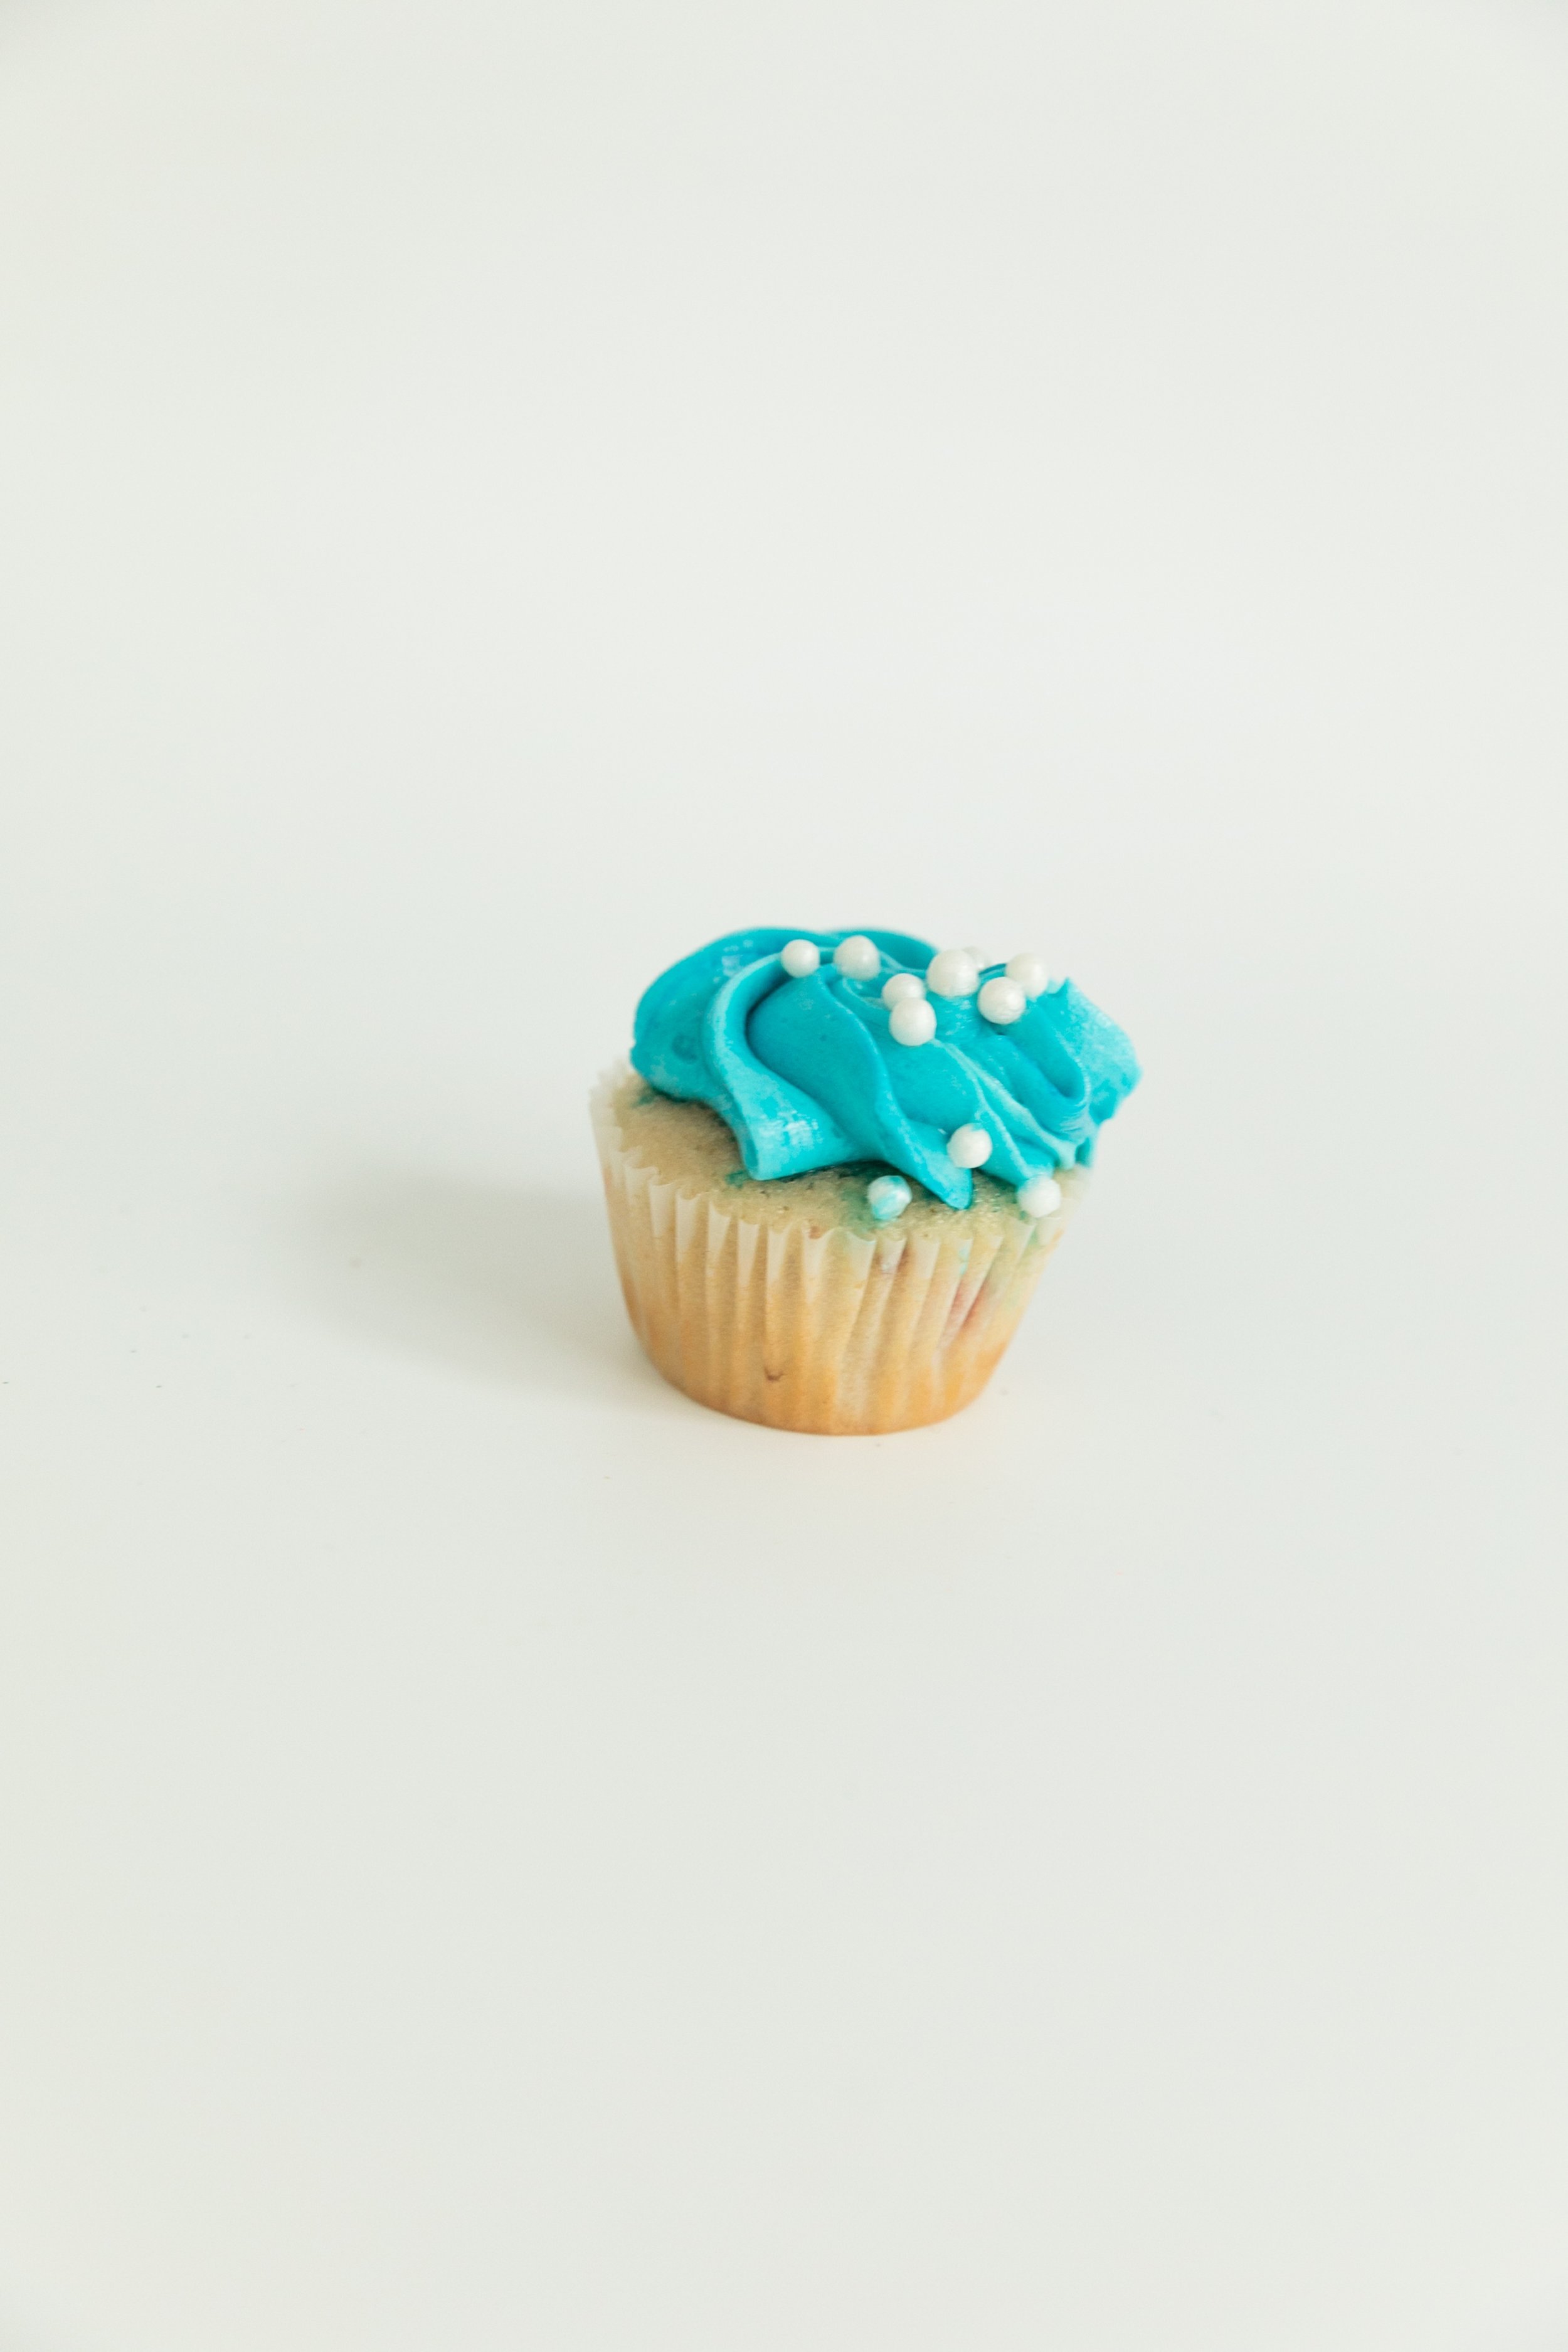  vanilla cupcake with blue vanilla buttercream and pearl sprinkles  